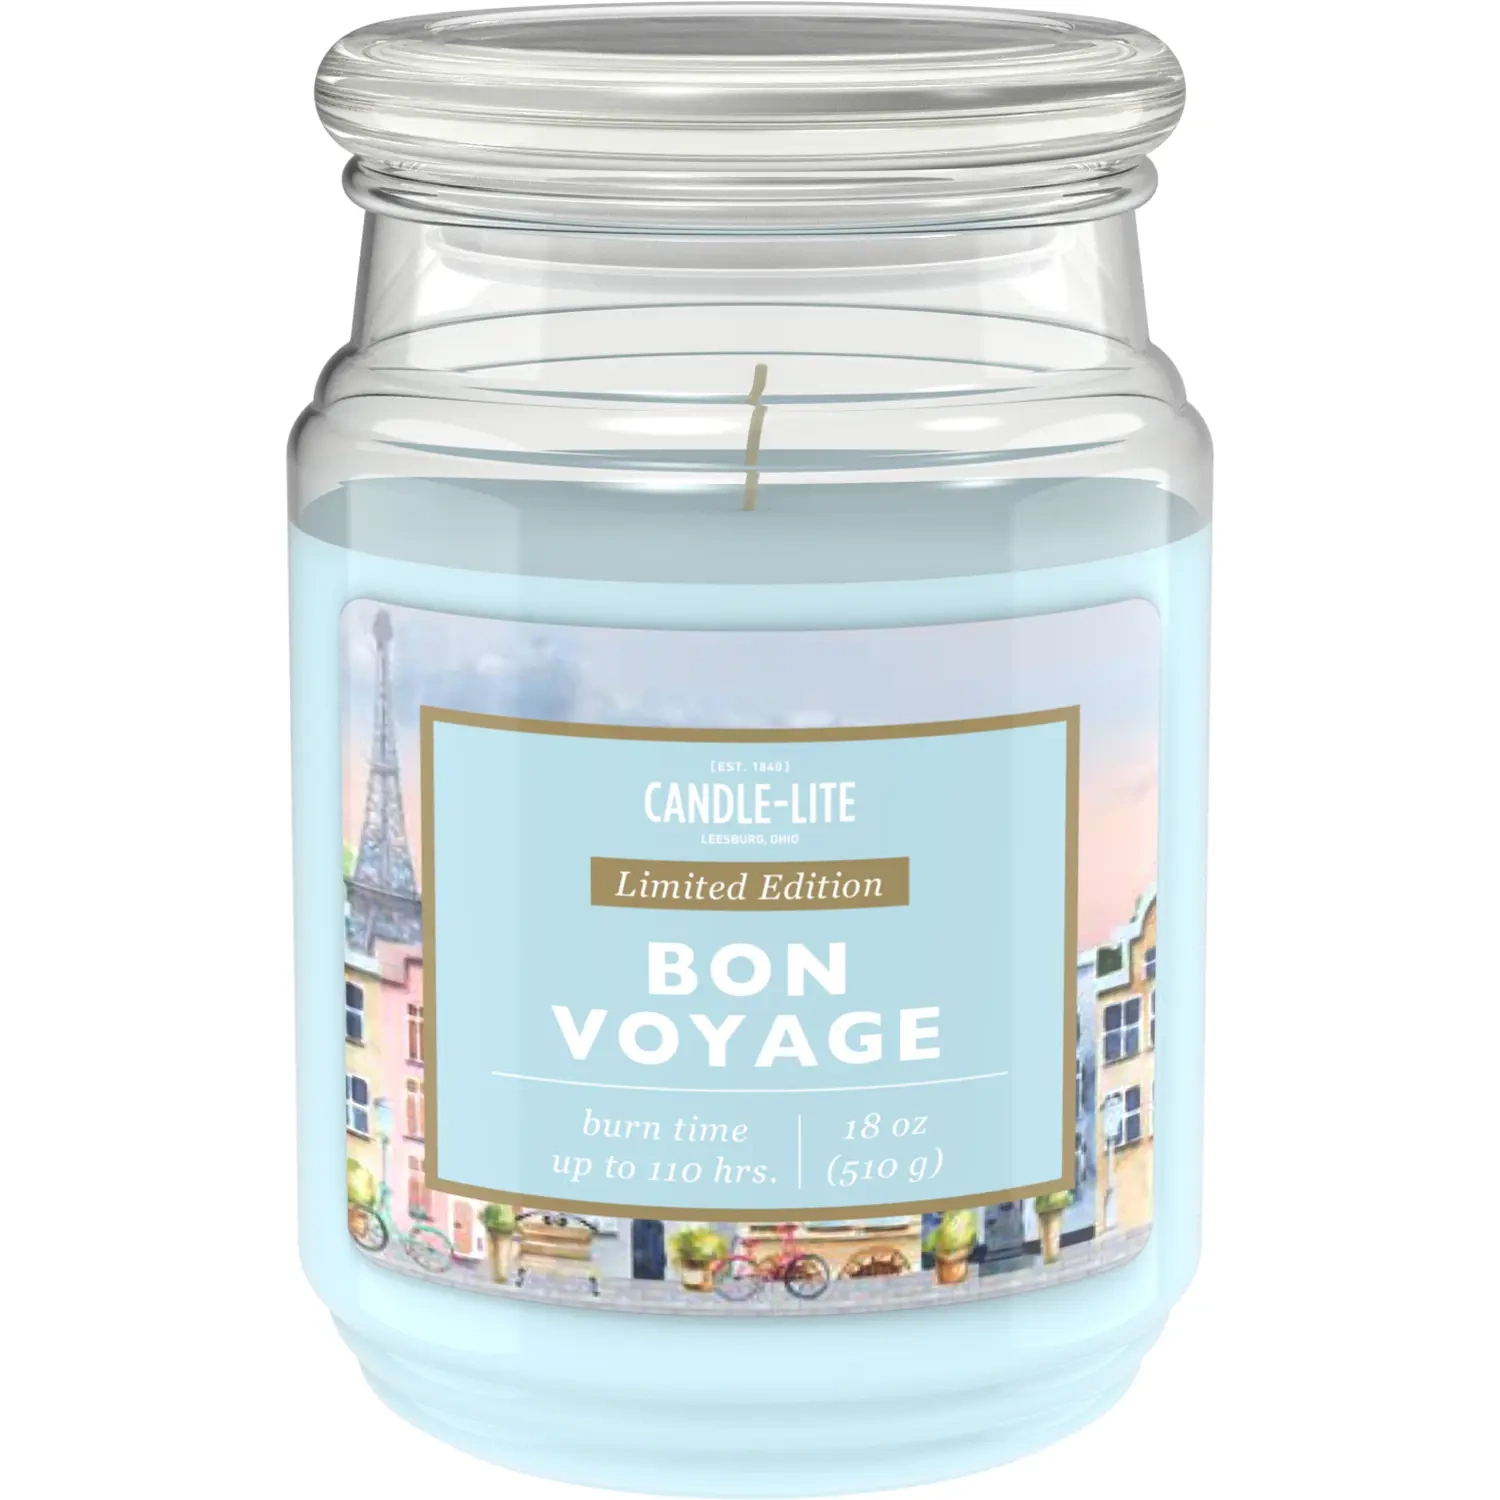 Sea scented candle Bon Voyage Candle-lite